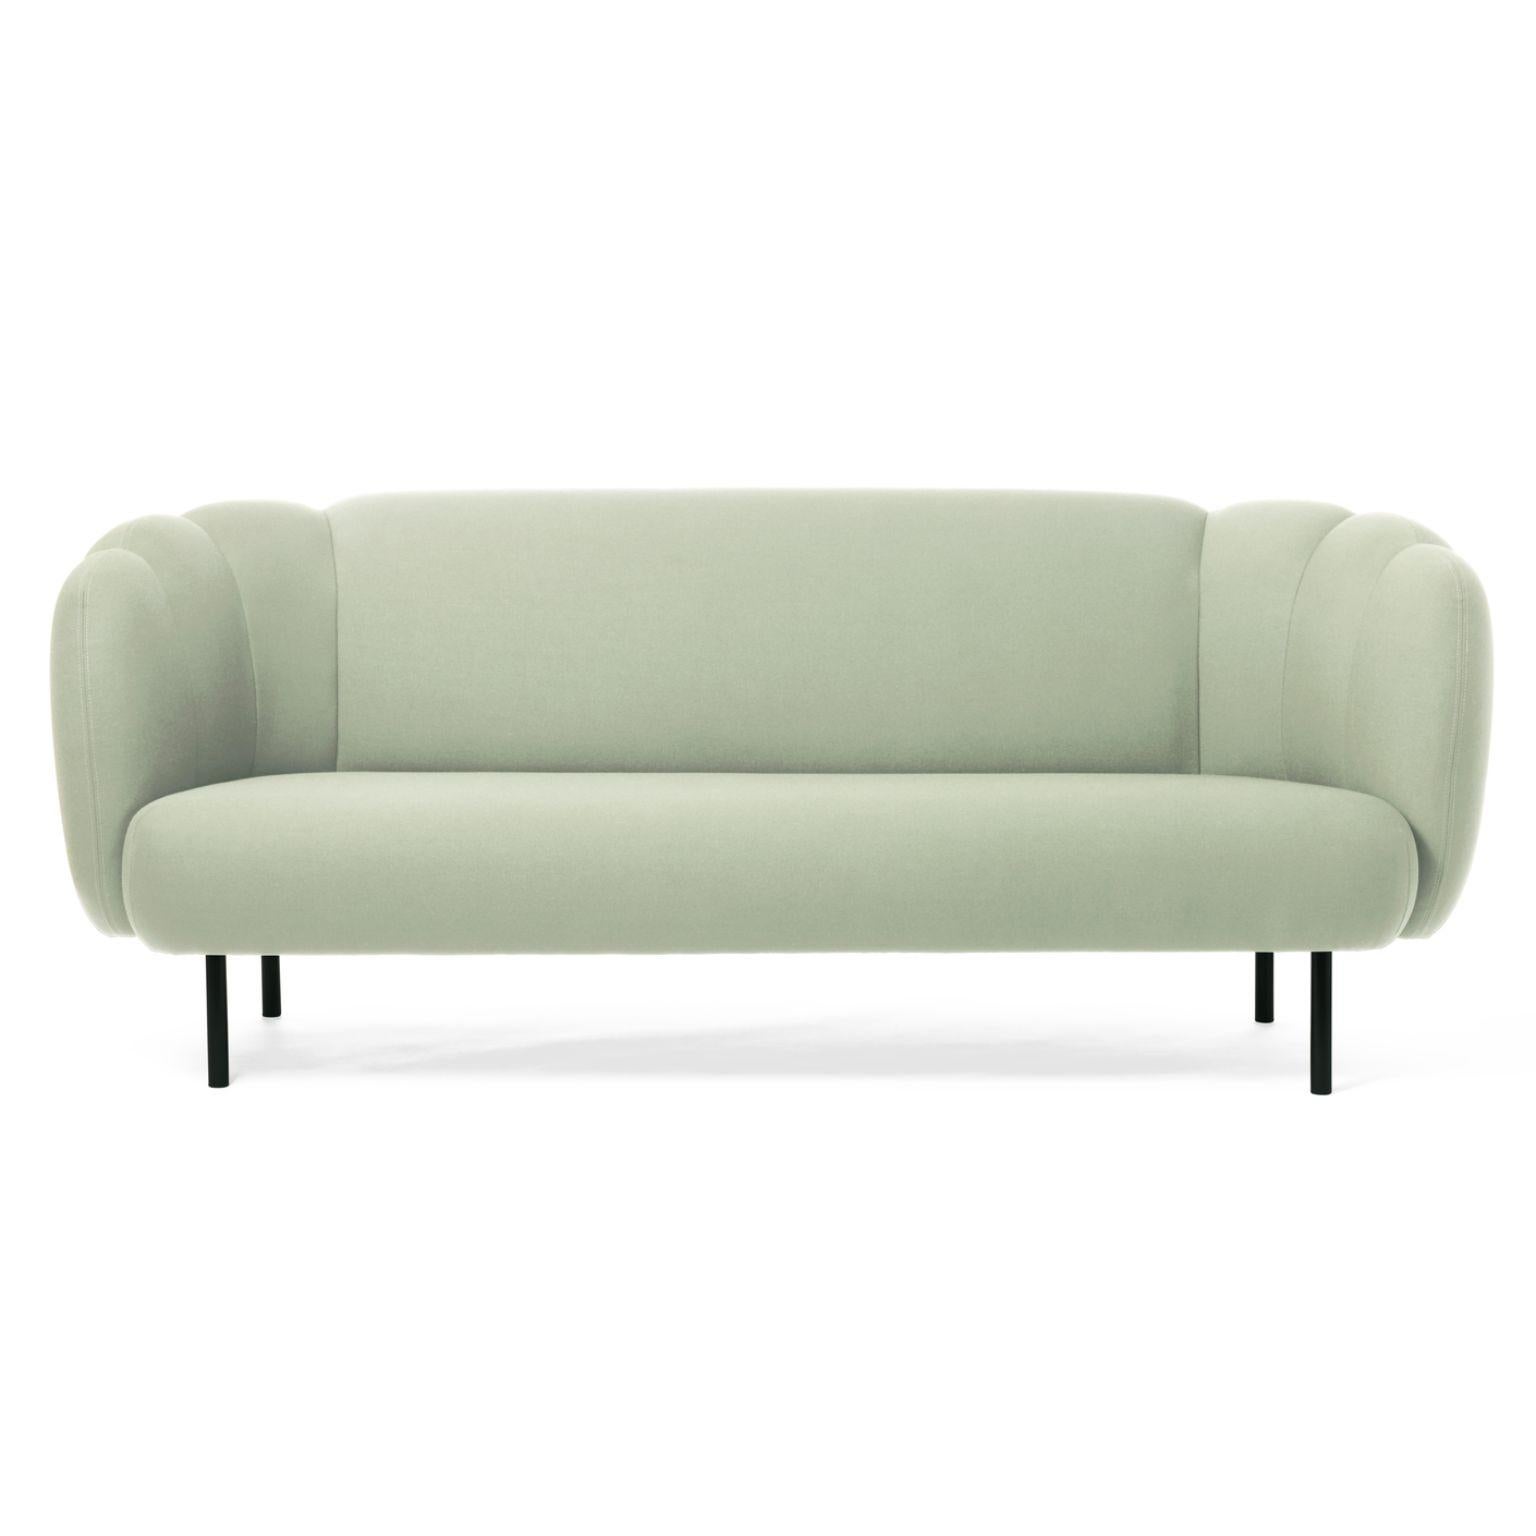 Caper 3 seater with stitches mint by Warm Nordic
Dimensions: D 200 x W 84 x H 80 cm
Material: Textile upholstery, Wooden frame, Powder coated black steel legs.
Weight: 55.5 kg
Also available in different colours and finishes.

An elegant sofa